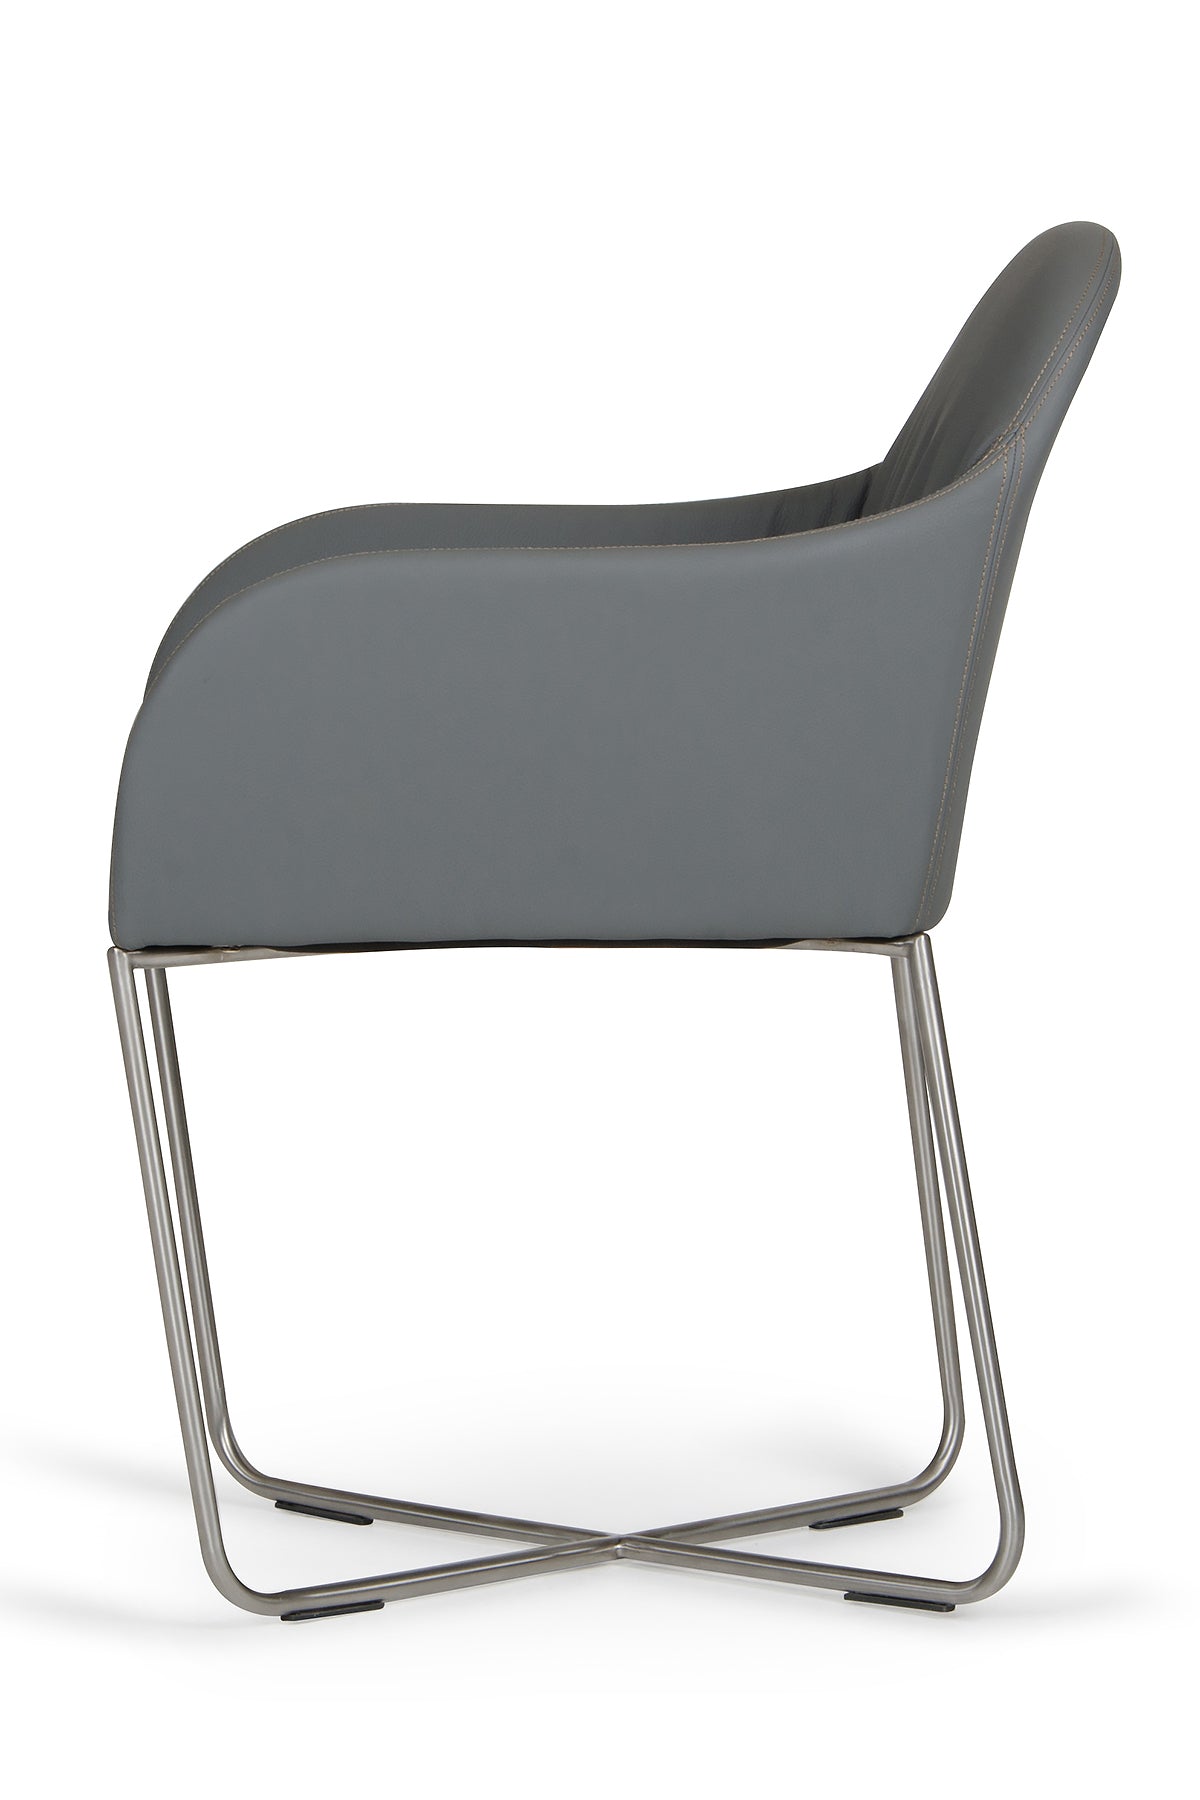 34" Grey Leatherette And Steel Dining Chair